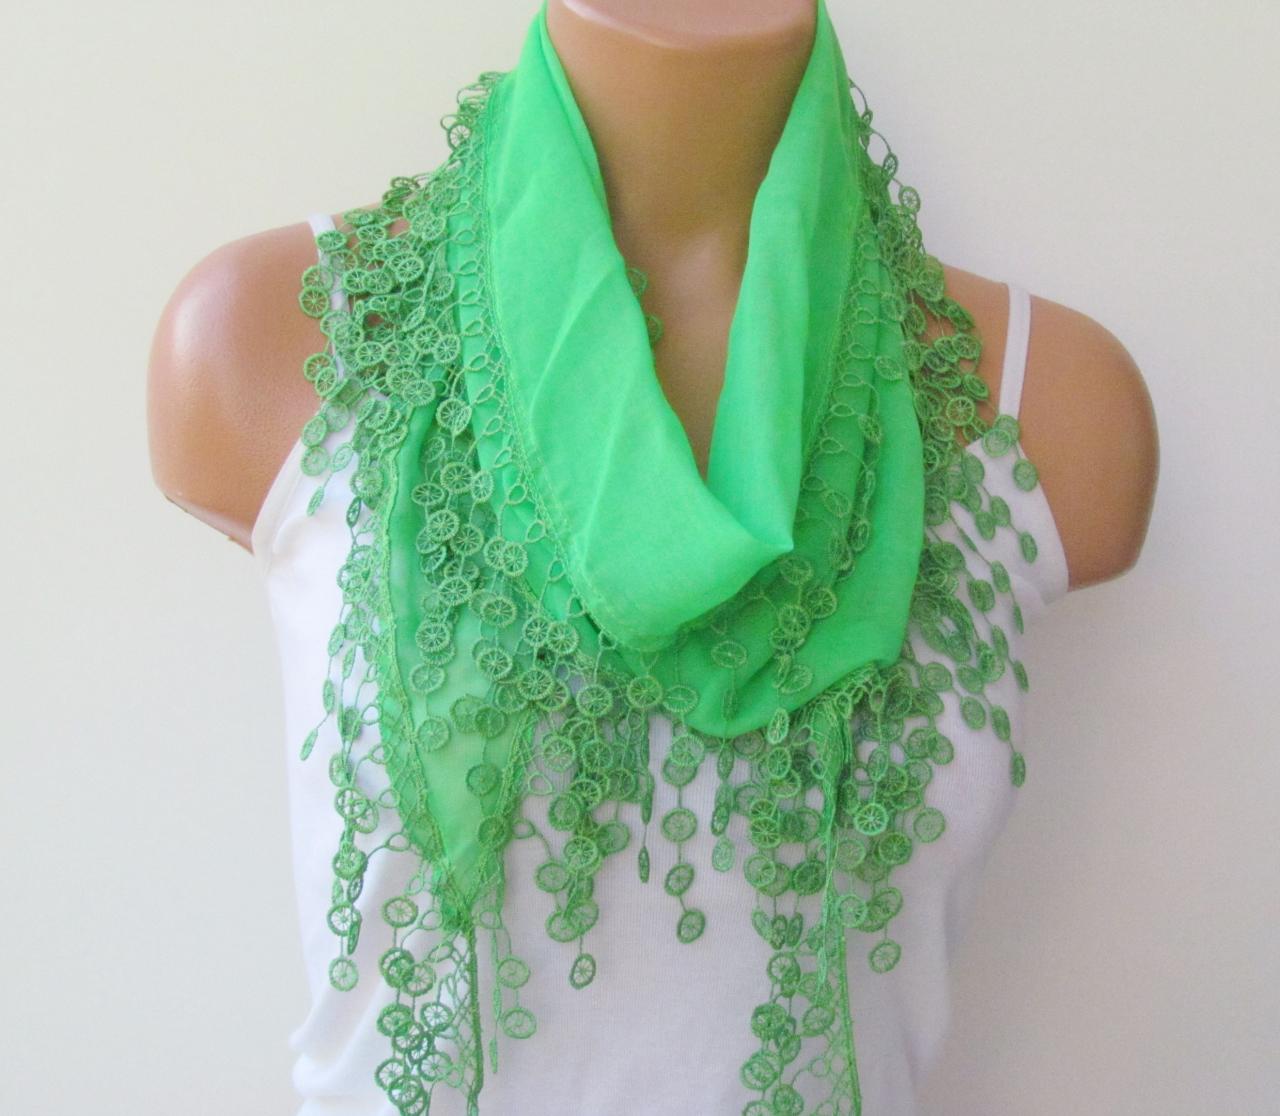 Long Scarf With Fringe-New Season Scarf-Headband-Necklace- Infinity Scarf- Spring Accessory-Pistachio Green Scarf-New Season-Gift